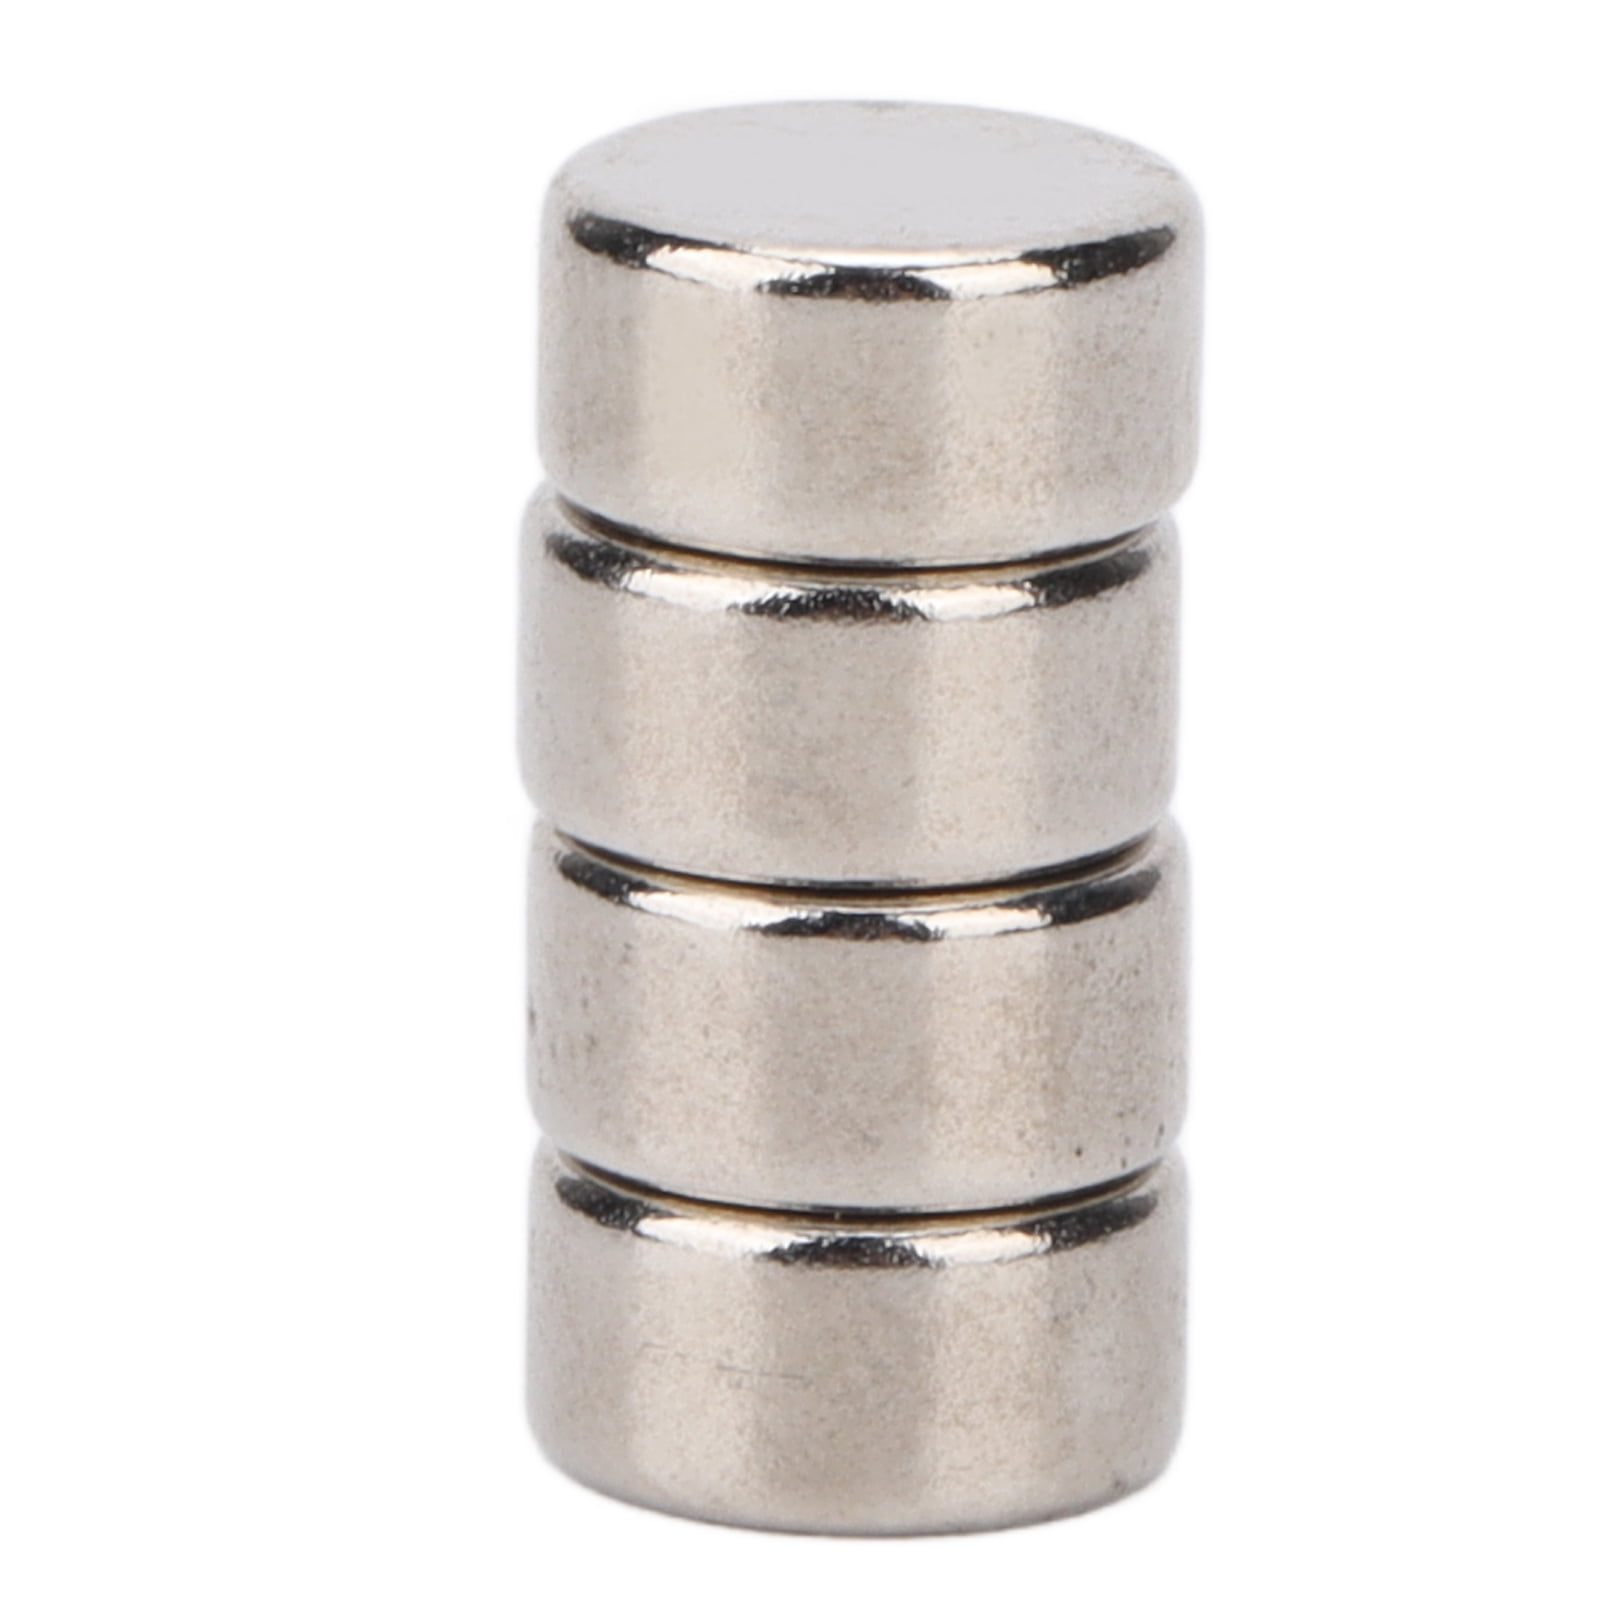 1-10000Pcs 6x20 mm Powerful Magnets 6mmx20mm Permanent Small Round Magnet  6x20mm Neodymium Magnet Super Strong 6*20 mm N35 imane - AliExpress